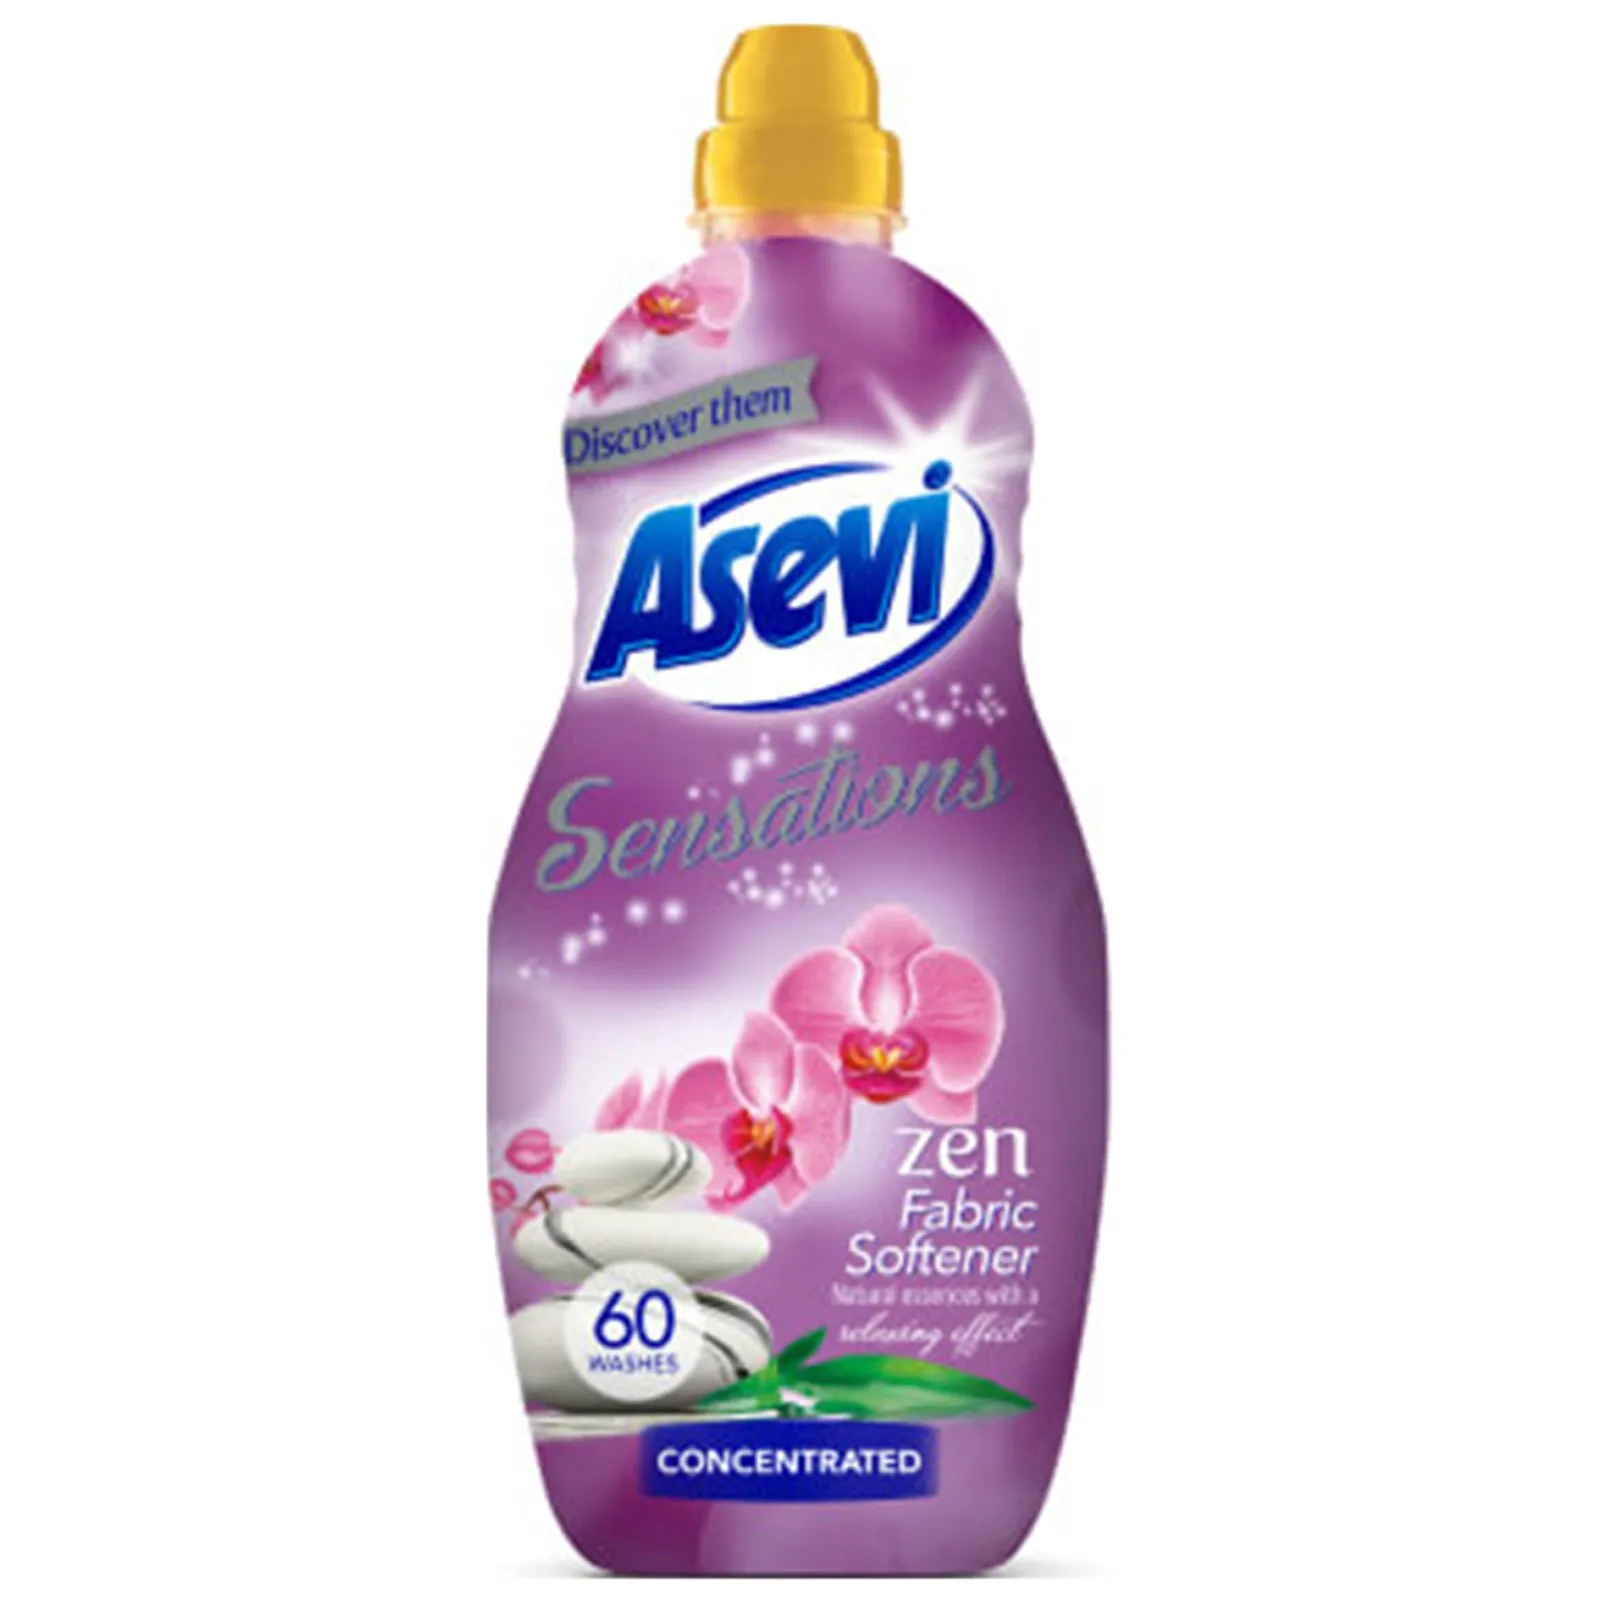 Asevi Fabric Softener Concentrated Zen 60 Washes 1.32L